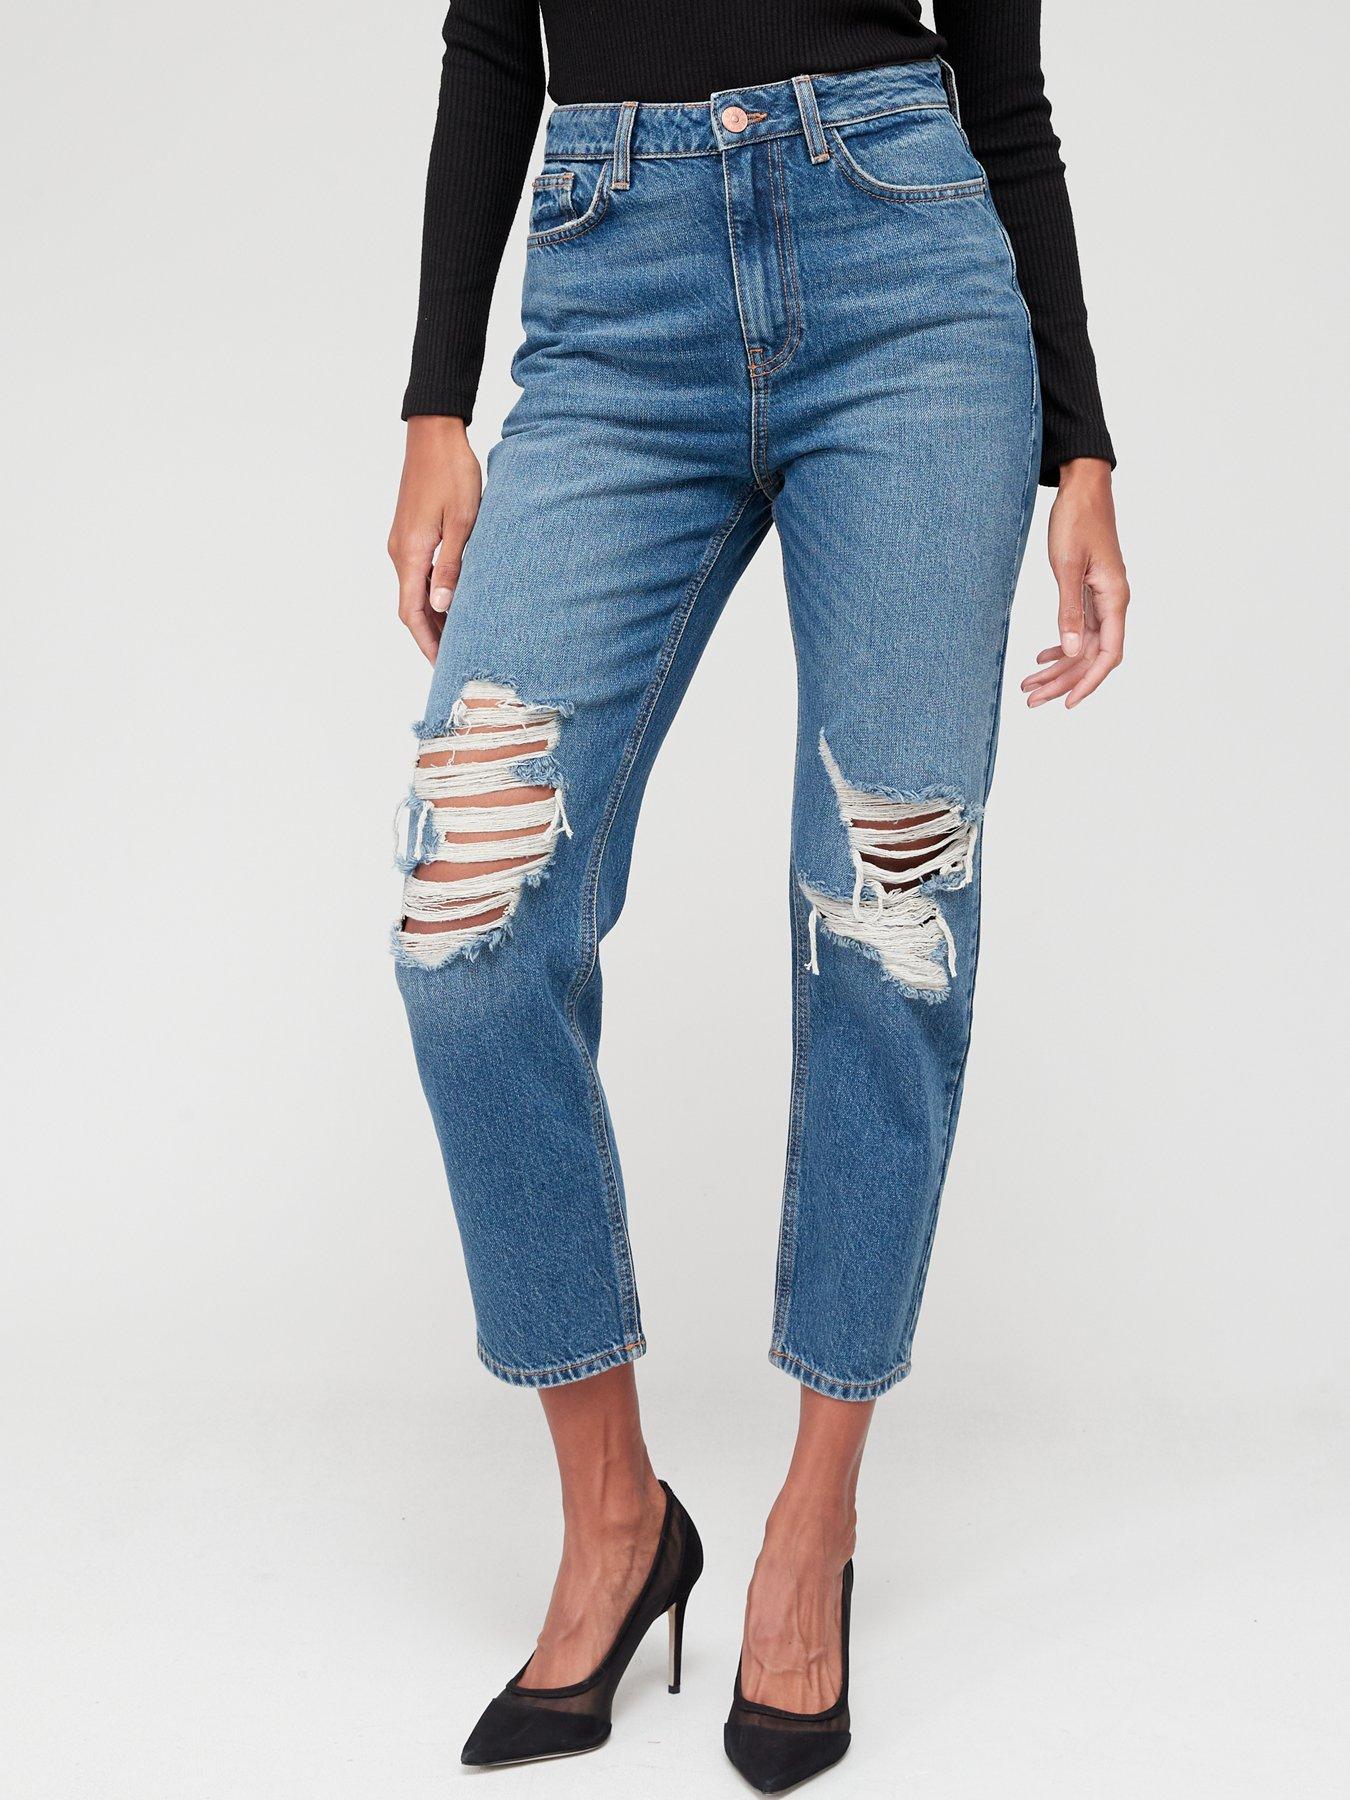 Womens Ripped Distressed Jeans Hole Mid Rise Slim Fit Super Stretchy Skinny Comfy Tassel Denim Pants Morecome 